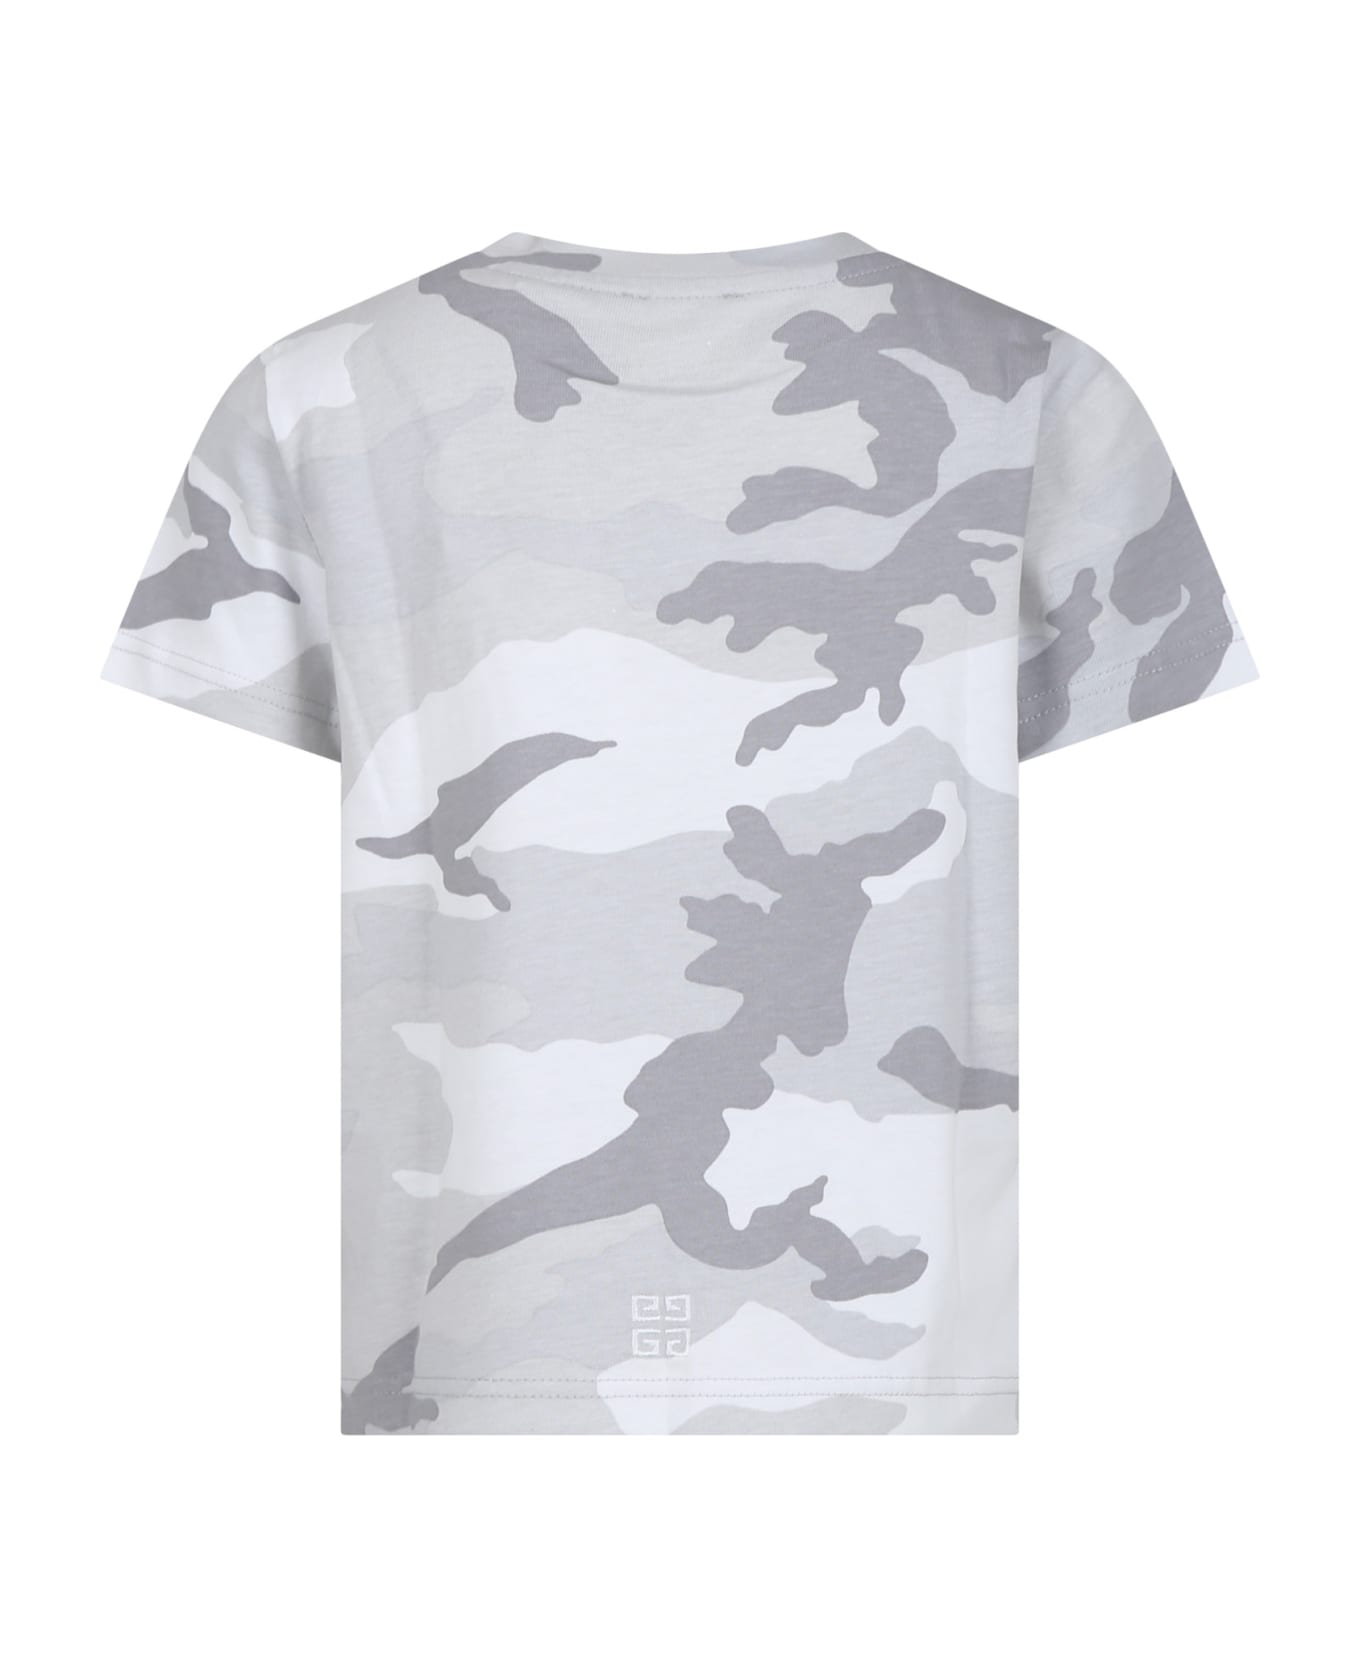 Givenchy Gray T-shirt For Boy With Camouflage Print - Grey